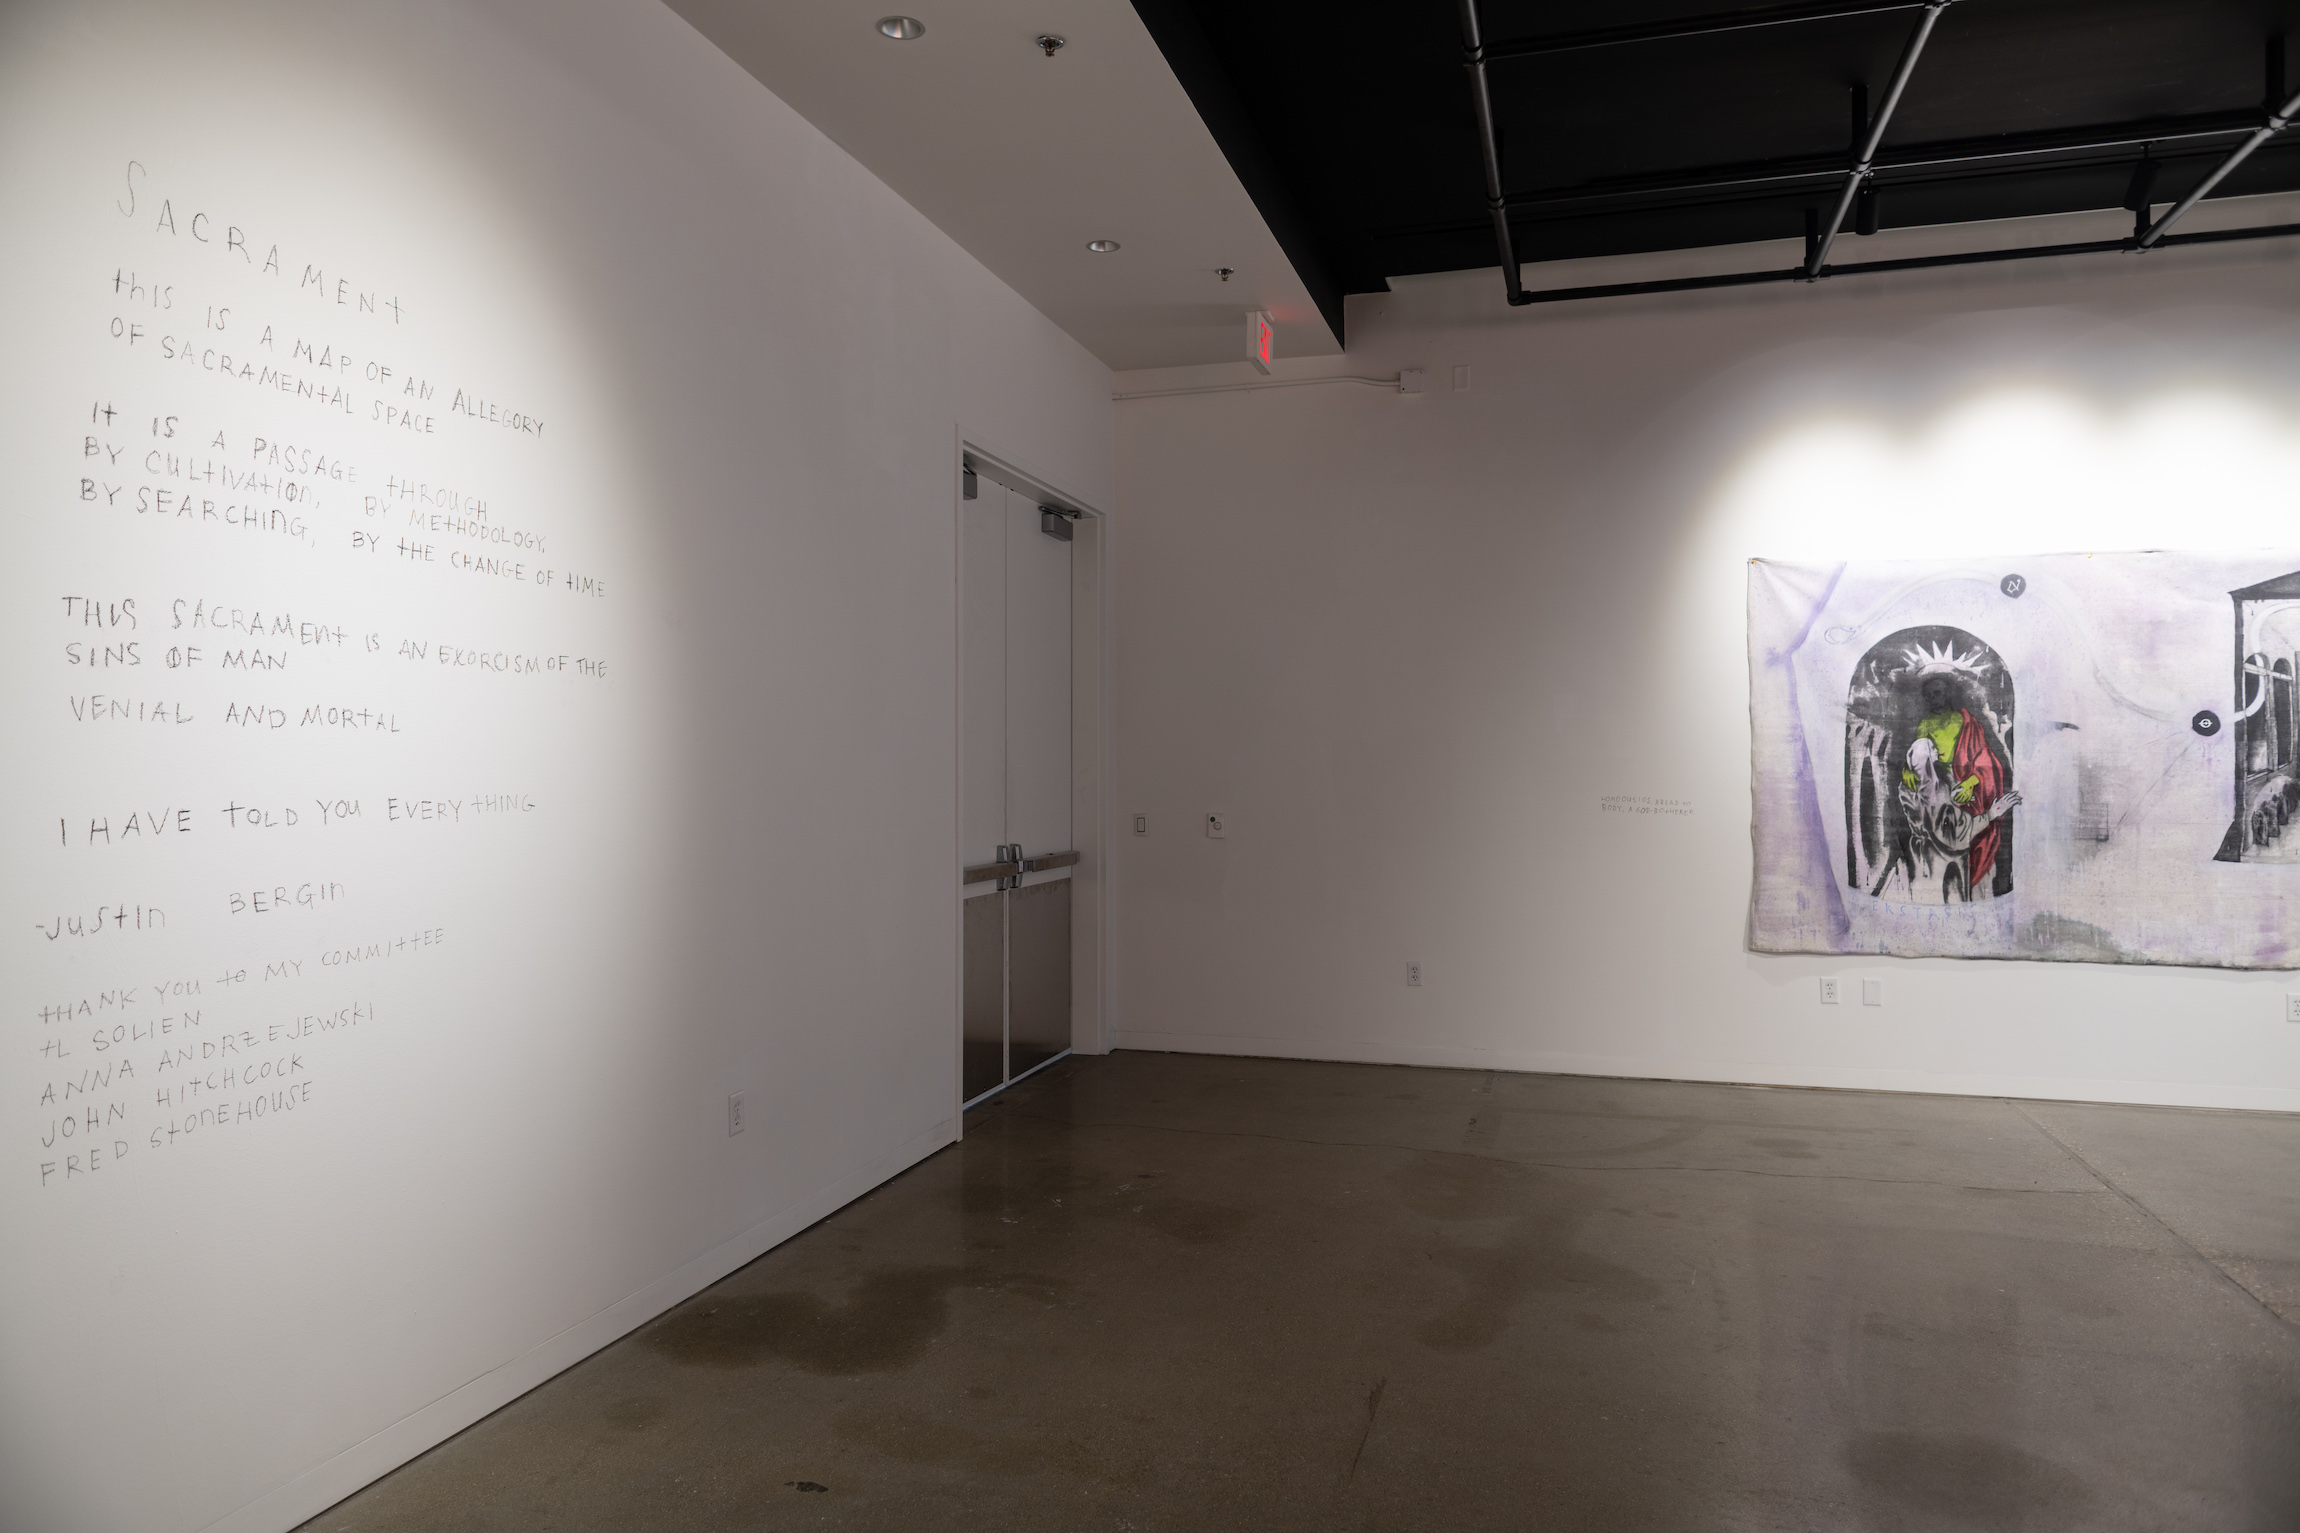 Installation view of Justin Bergin's Master of Fine Arts exhibition Sacrament at the Art Lofts Gallery, University of Wisconsin-Madison. Photography by Kyle Herrera.